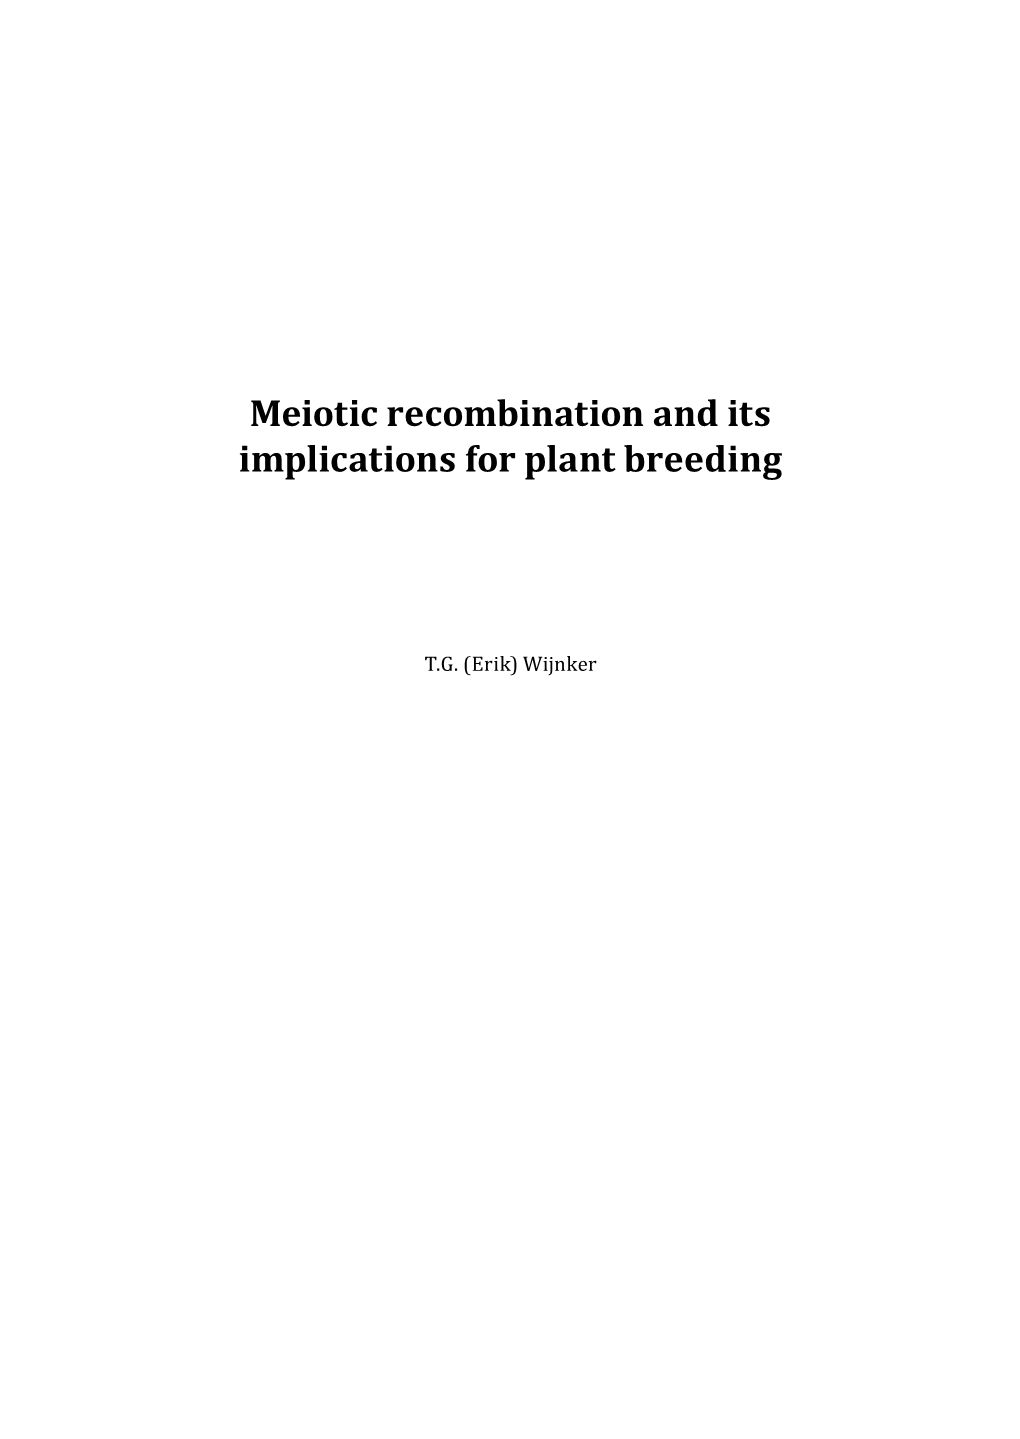 Meiotic Recombination and Its Implications for Plant Breeding